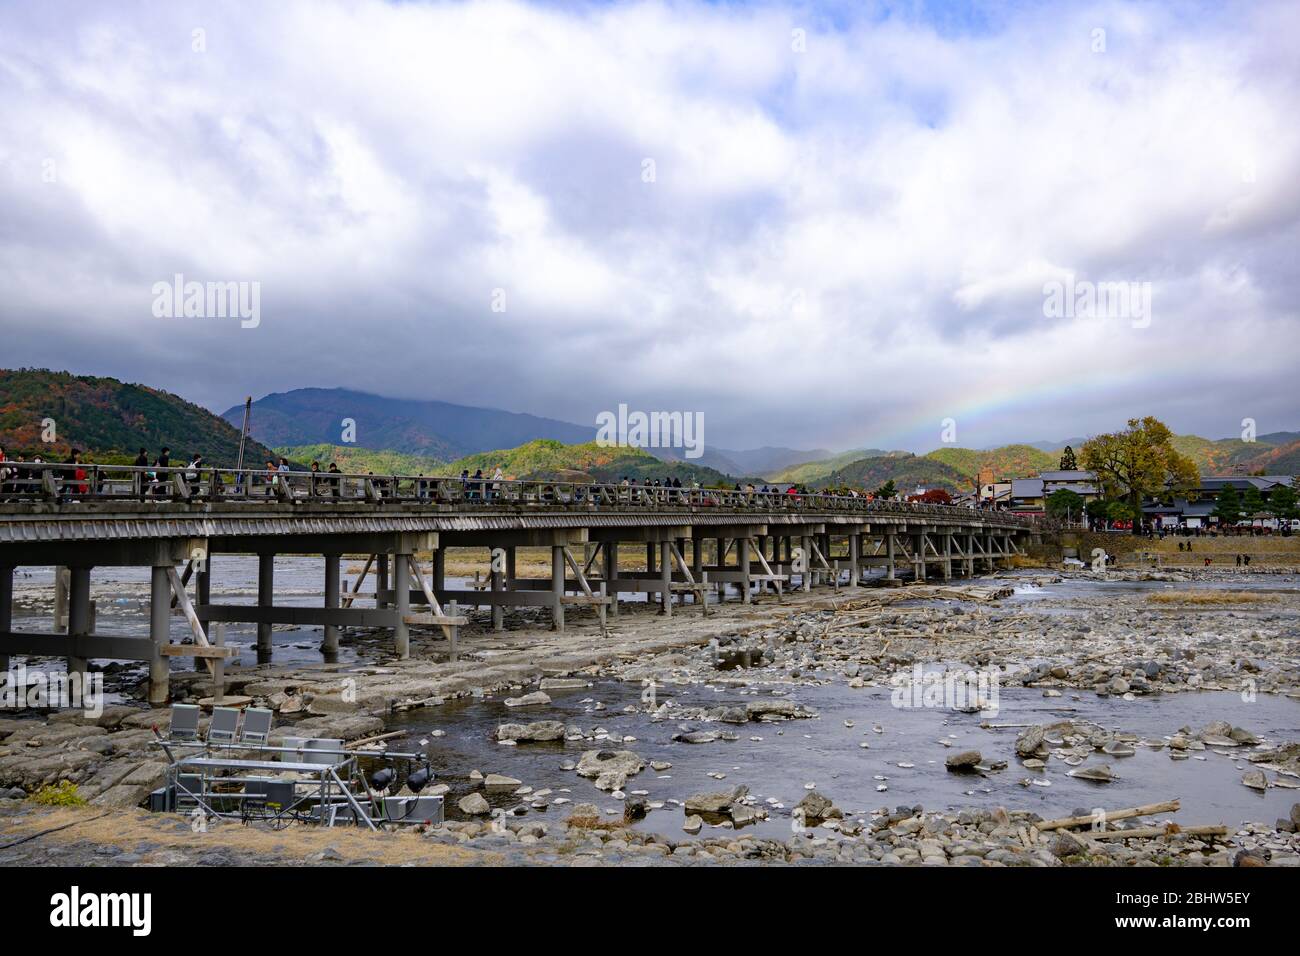 Arashiyama Togetsukyo Bridge was built during the Heian Period (794-1185), and reconstructed in the 1930s crossing the Oi River. This iconic landmark Stock Photo